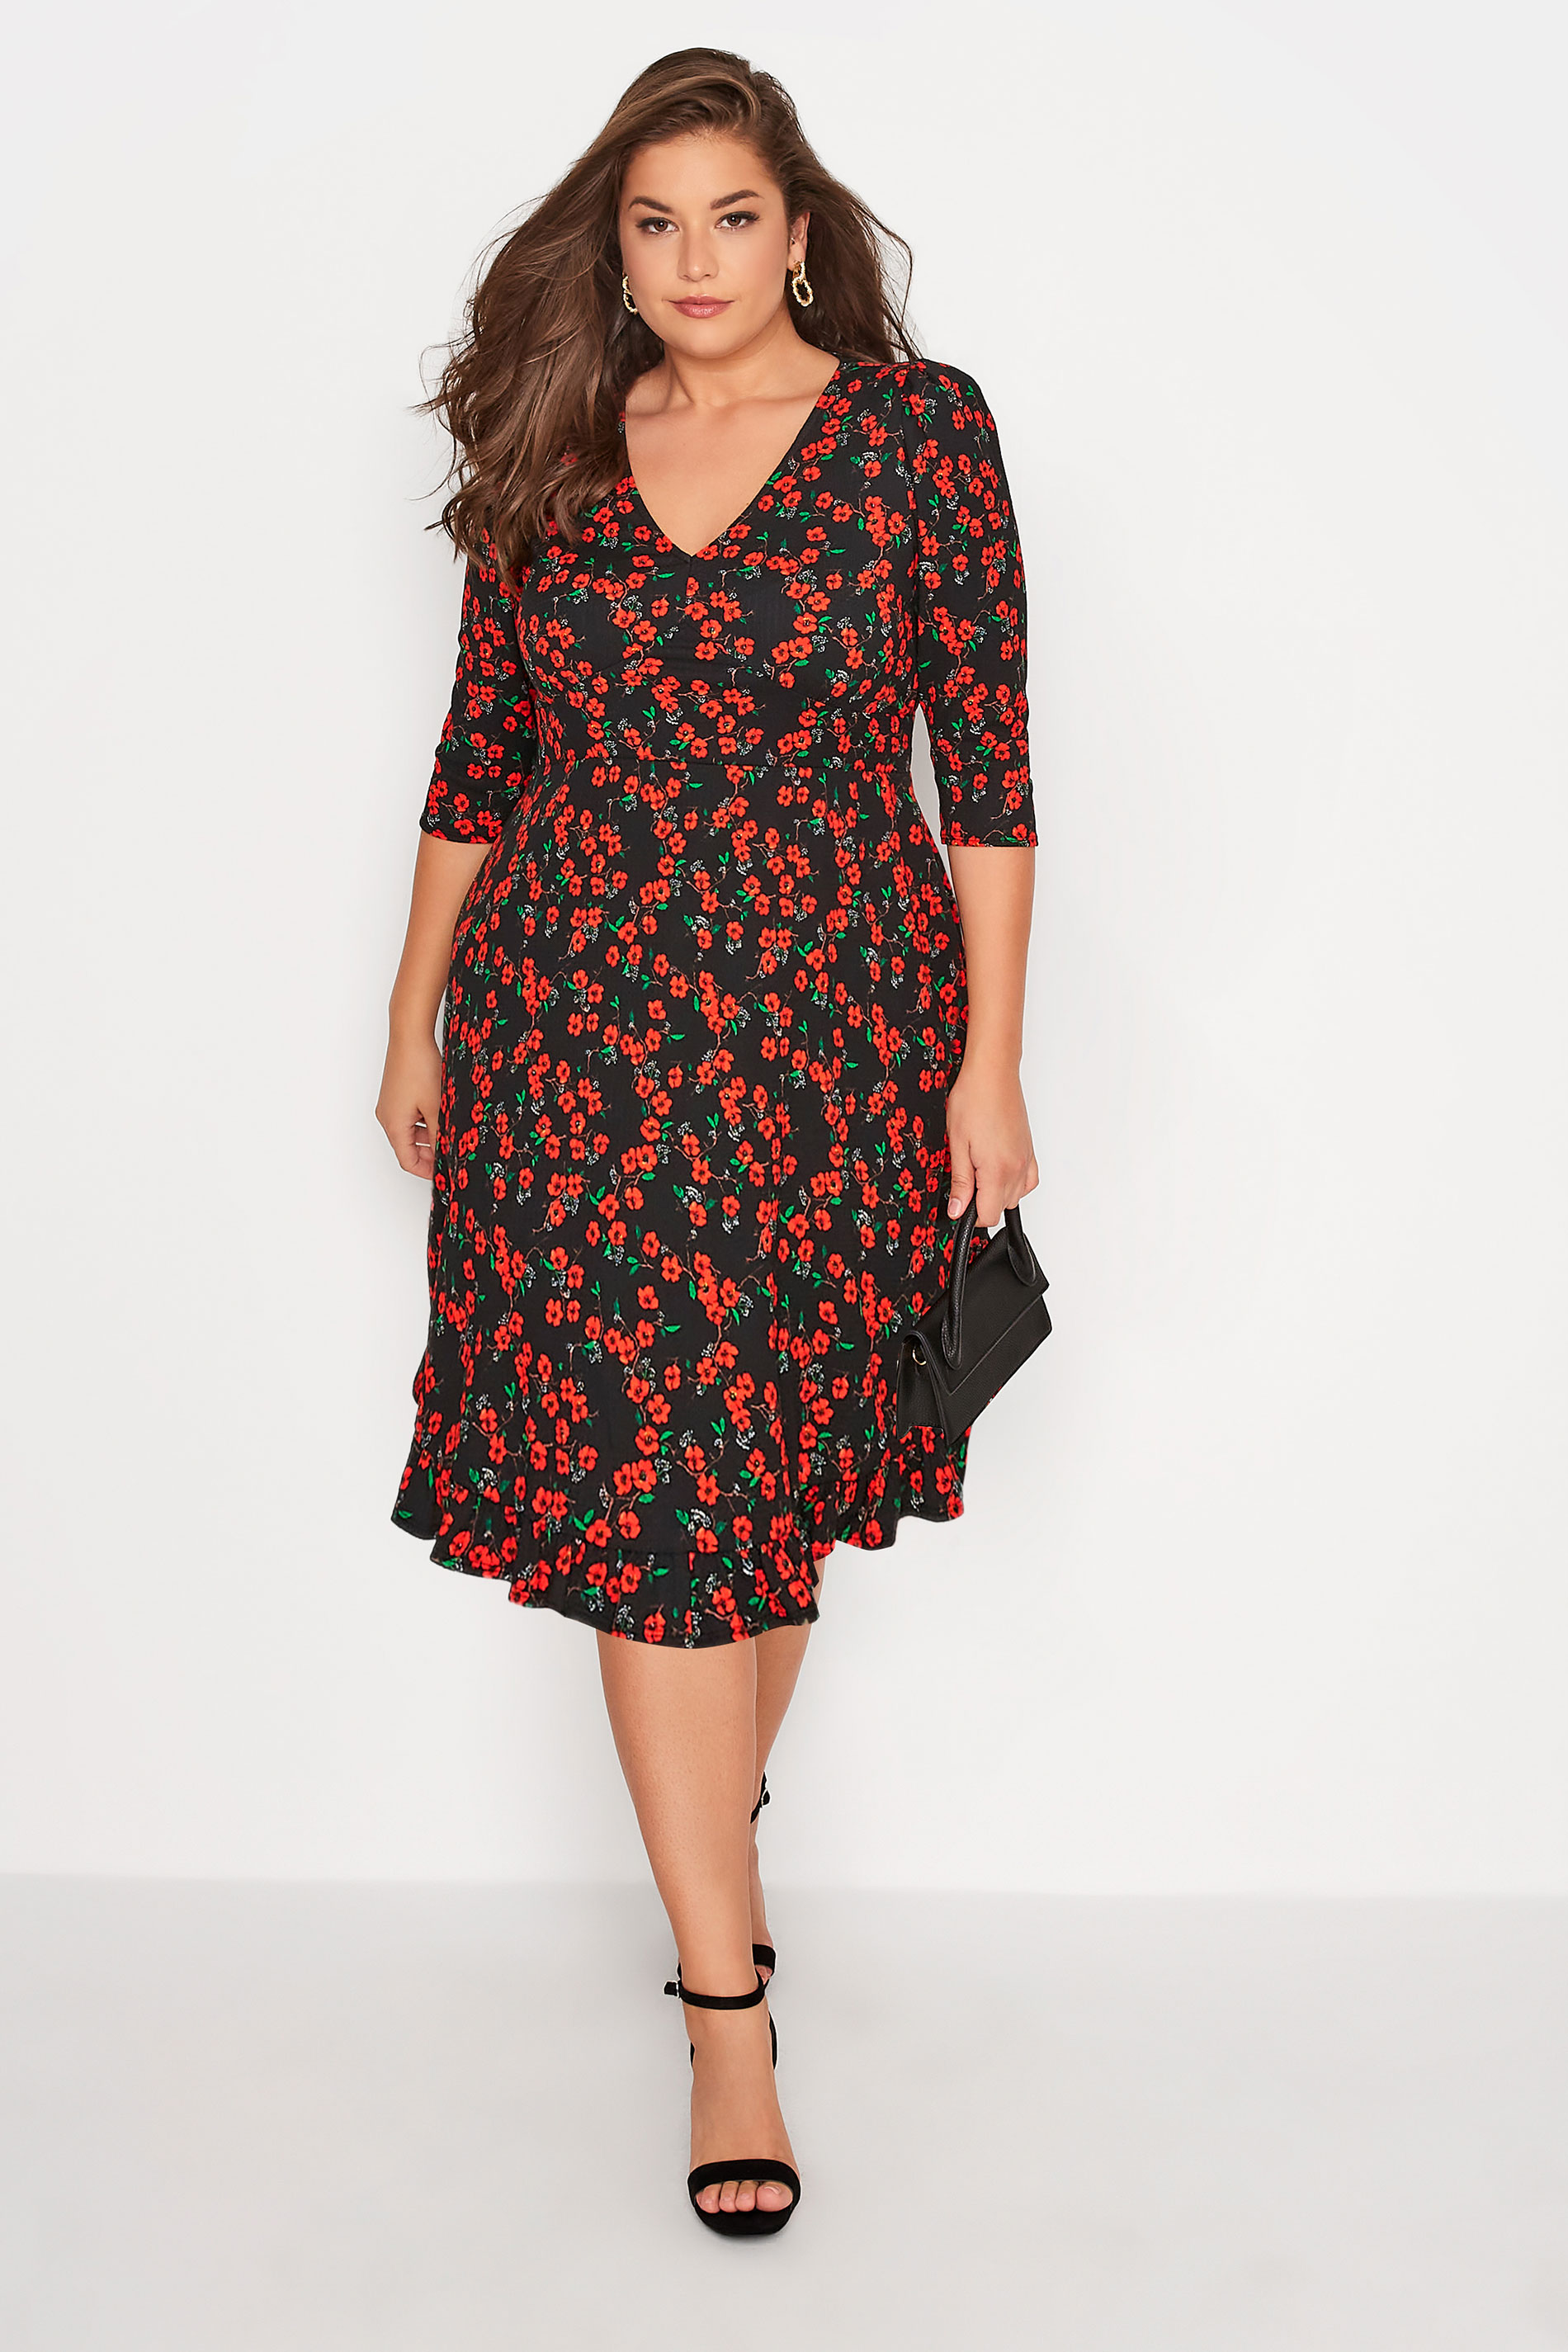 YOURS LONDON Curve Black & Red Ditsy Print Frill Trim Dress 1